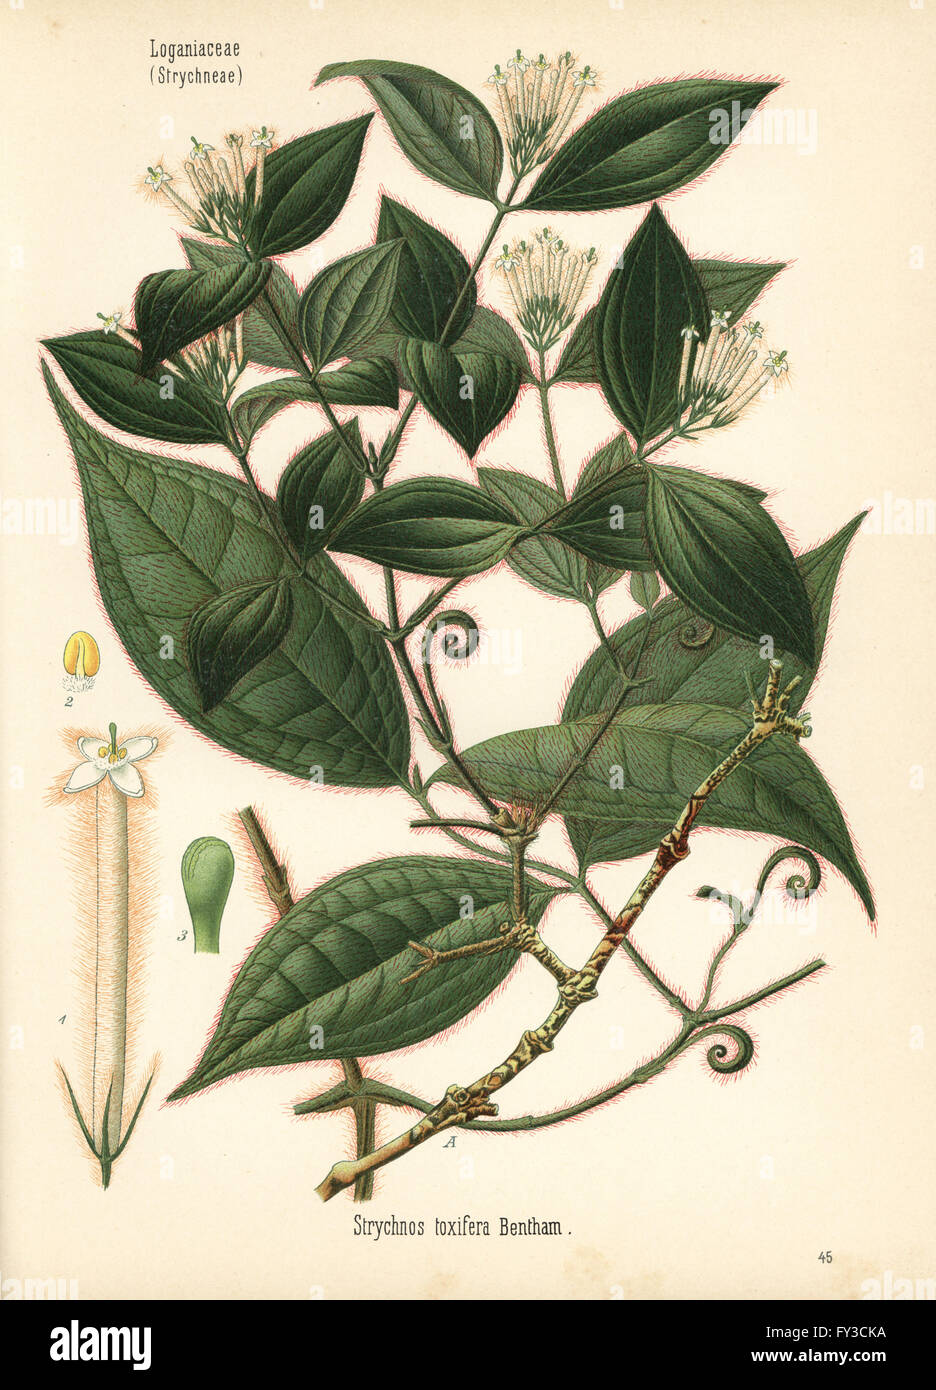 Curare, Strychnos toxifera. Chromolithograph after a botanical illustration from Hermann Adolph Koehler's Medicinal Plants, edited by Gustav Pabst, Koehler, Germany, 1887. Stock Photo